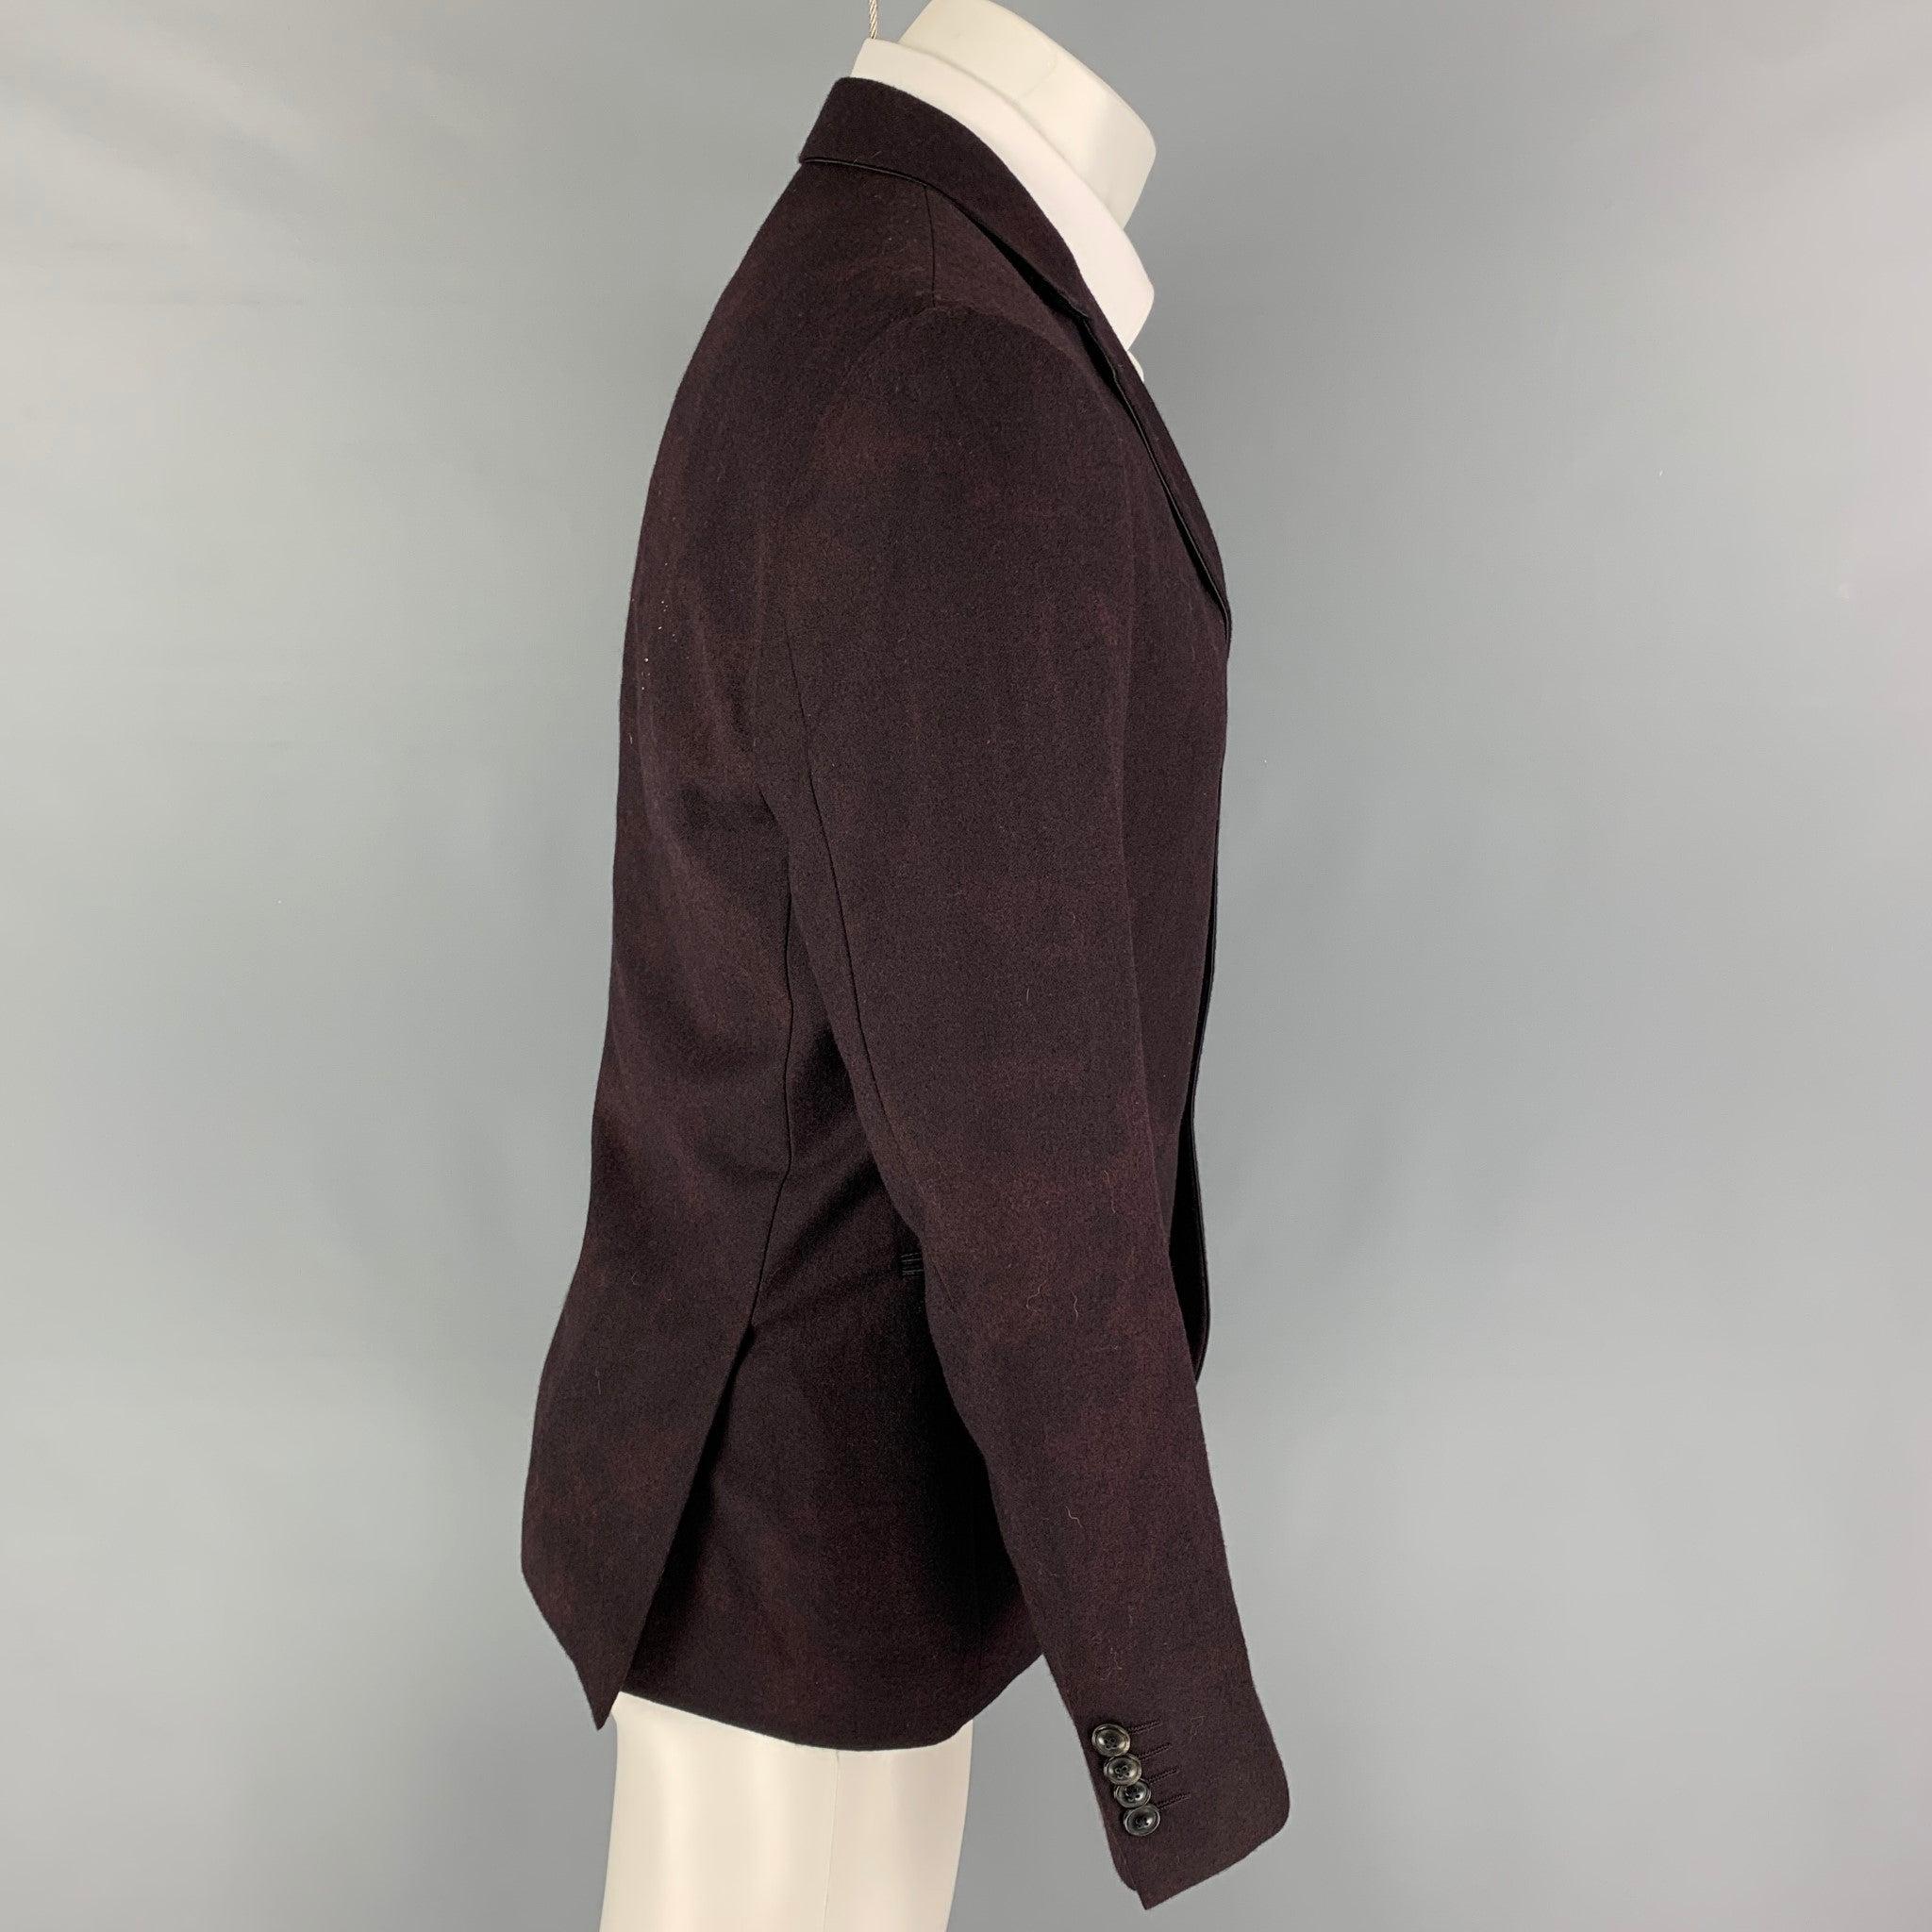 JOHN VARVATOS Size 38 Burgundy Black Dyed Wool Notch Lapel Sport Coat In Good Condition For Sale In San Francisco, CA